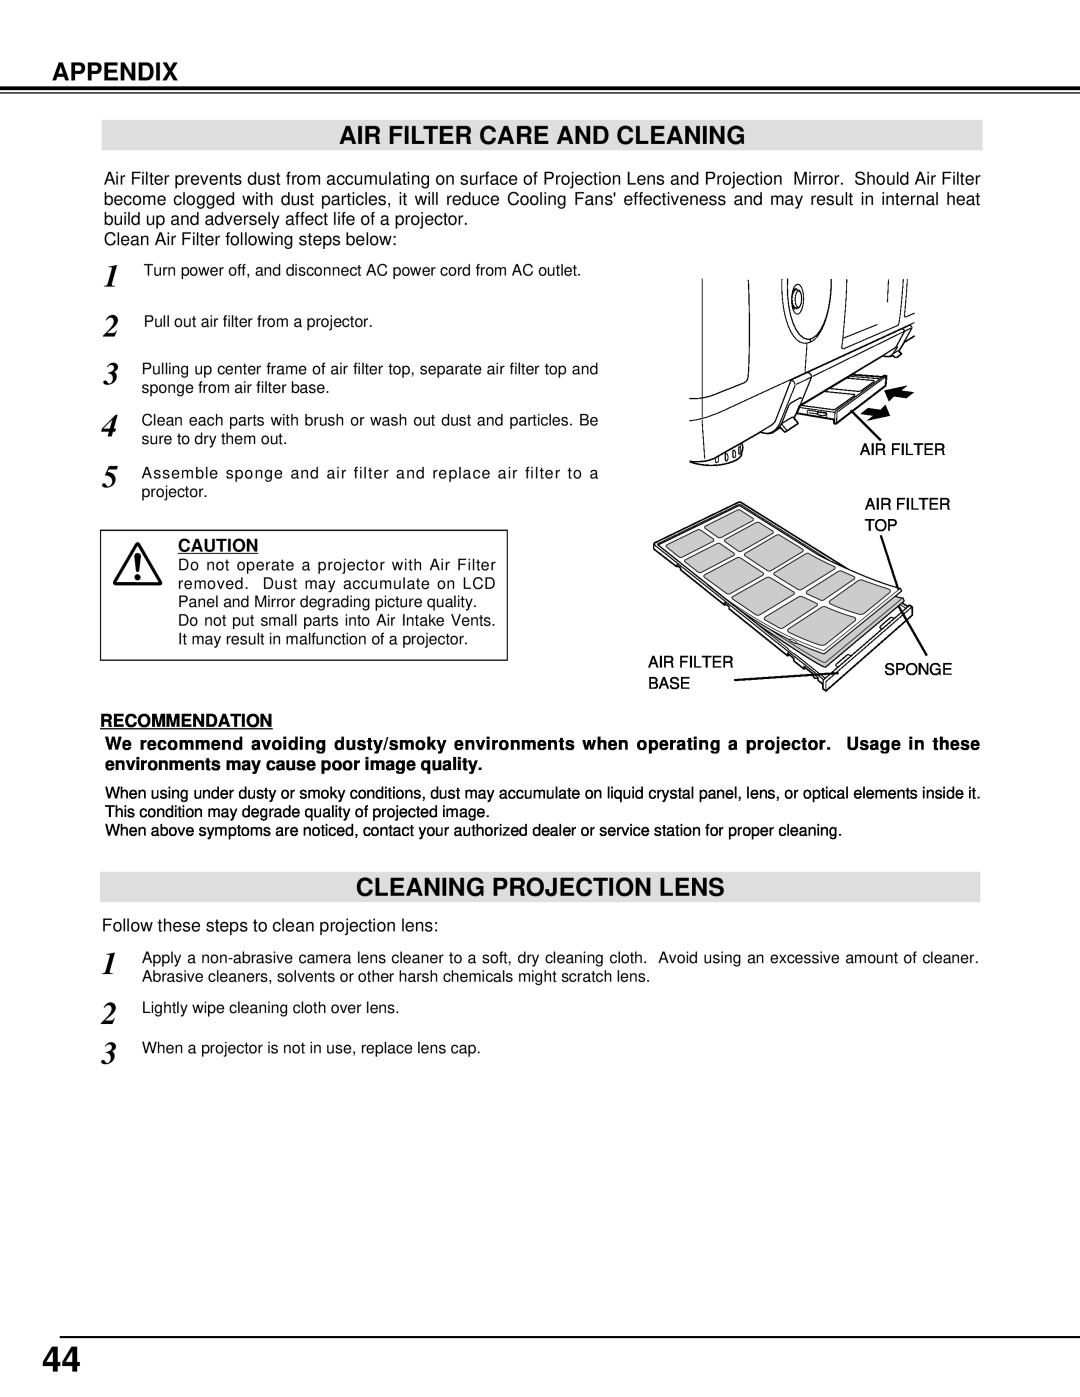 Eiki LC-XT2 instruction manual Appendix Air Filter Care And Cleaning, Cleaning Projection Lens, Recommendation 